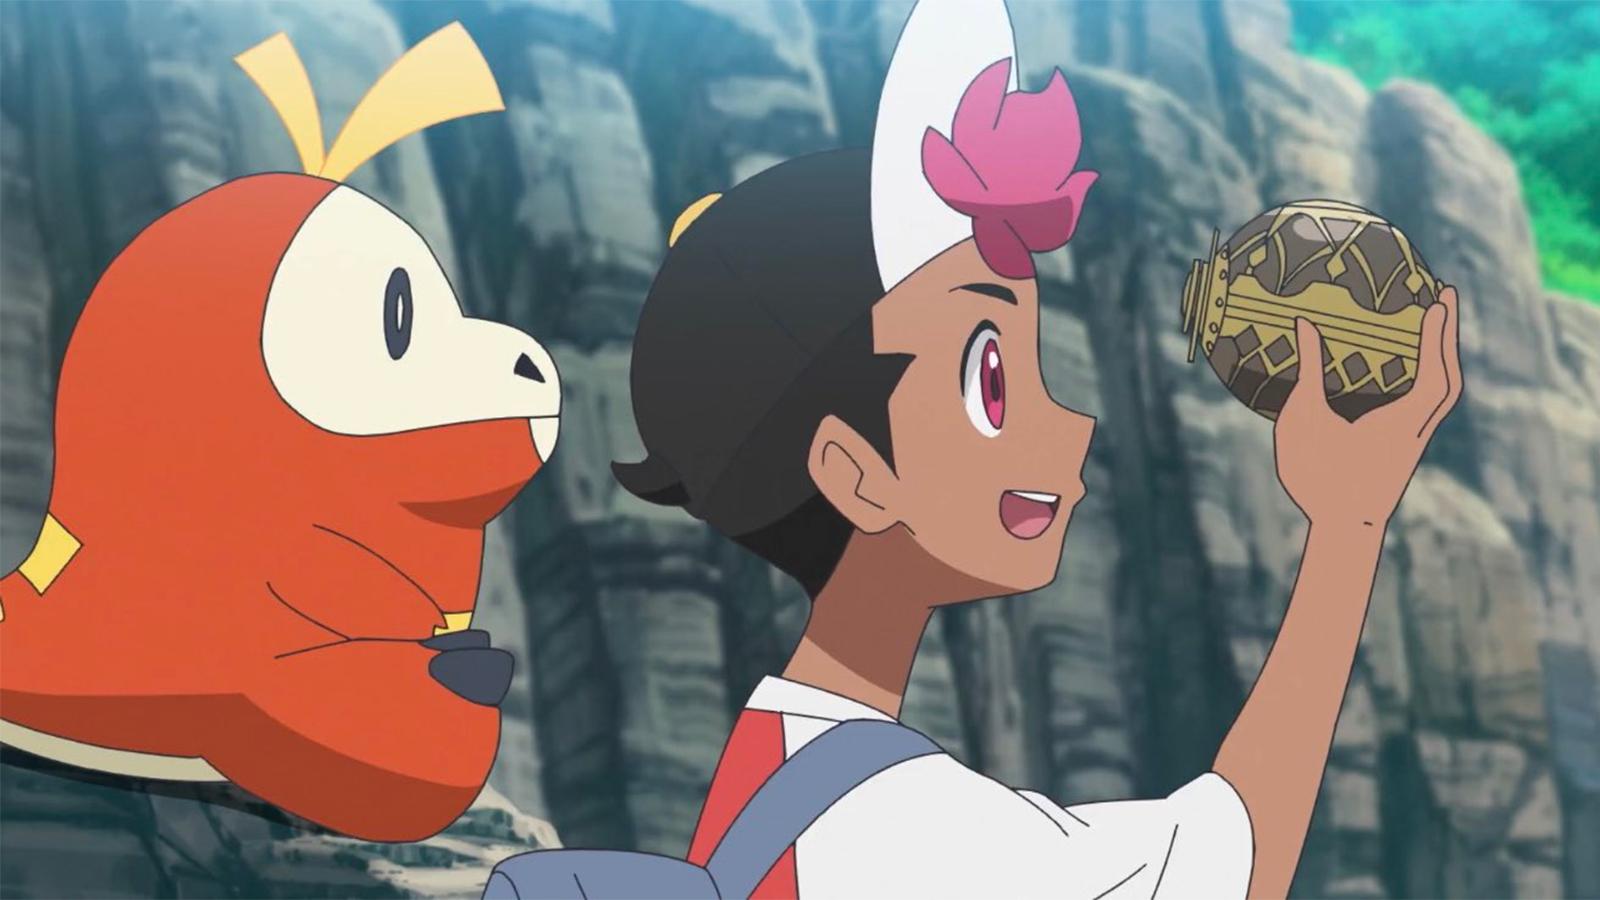 Pokemon 2023 anime set to introduce new character with Ceruledge